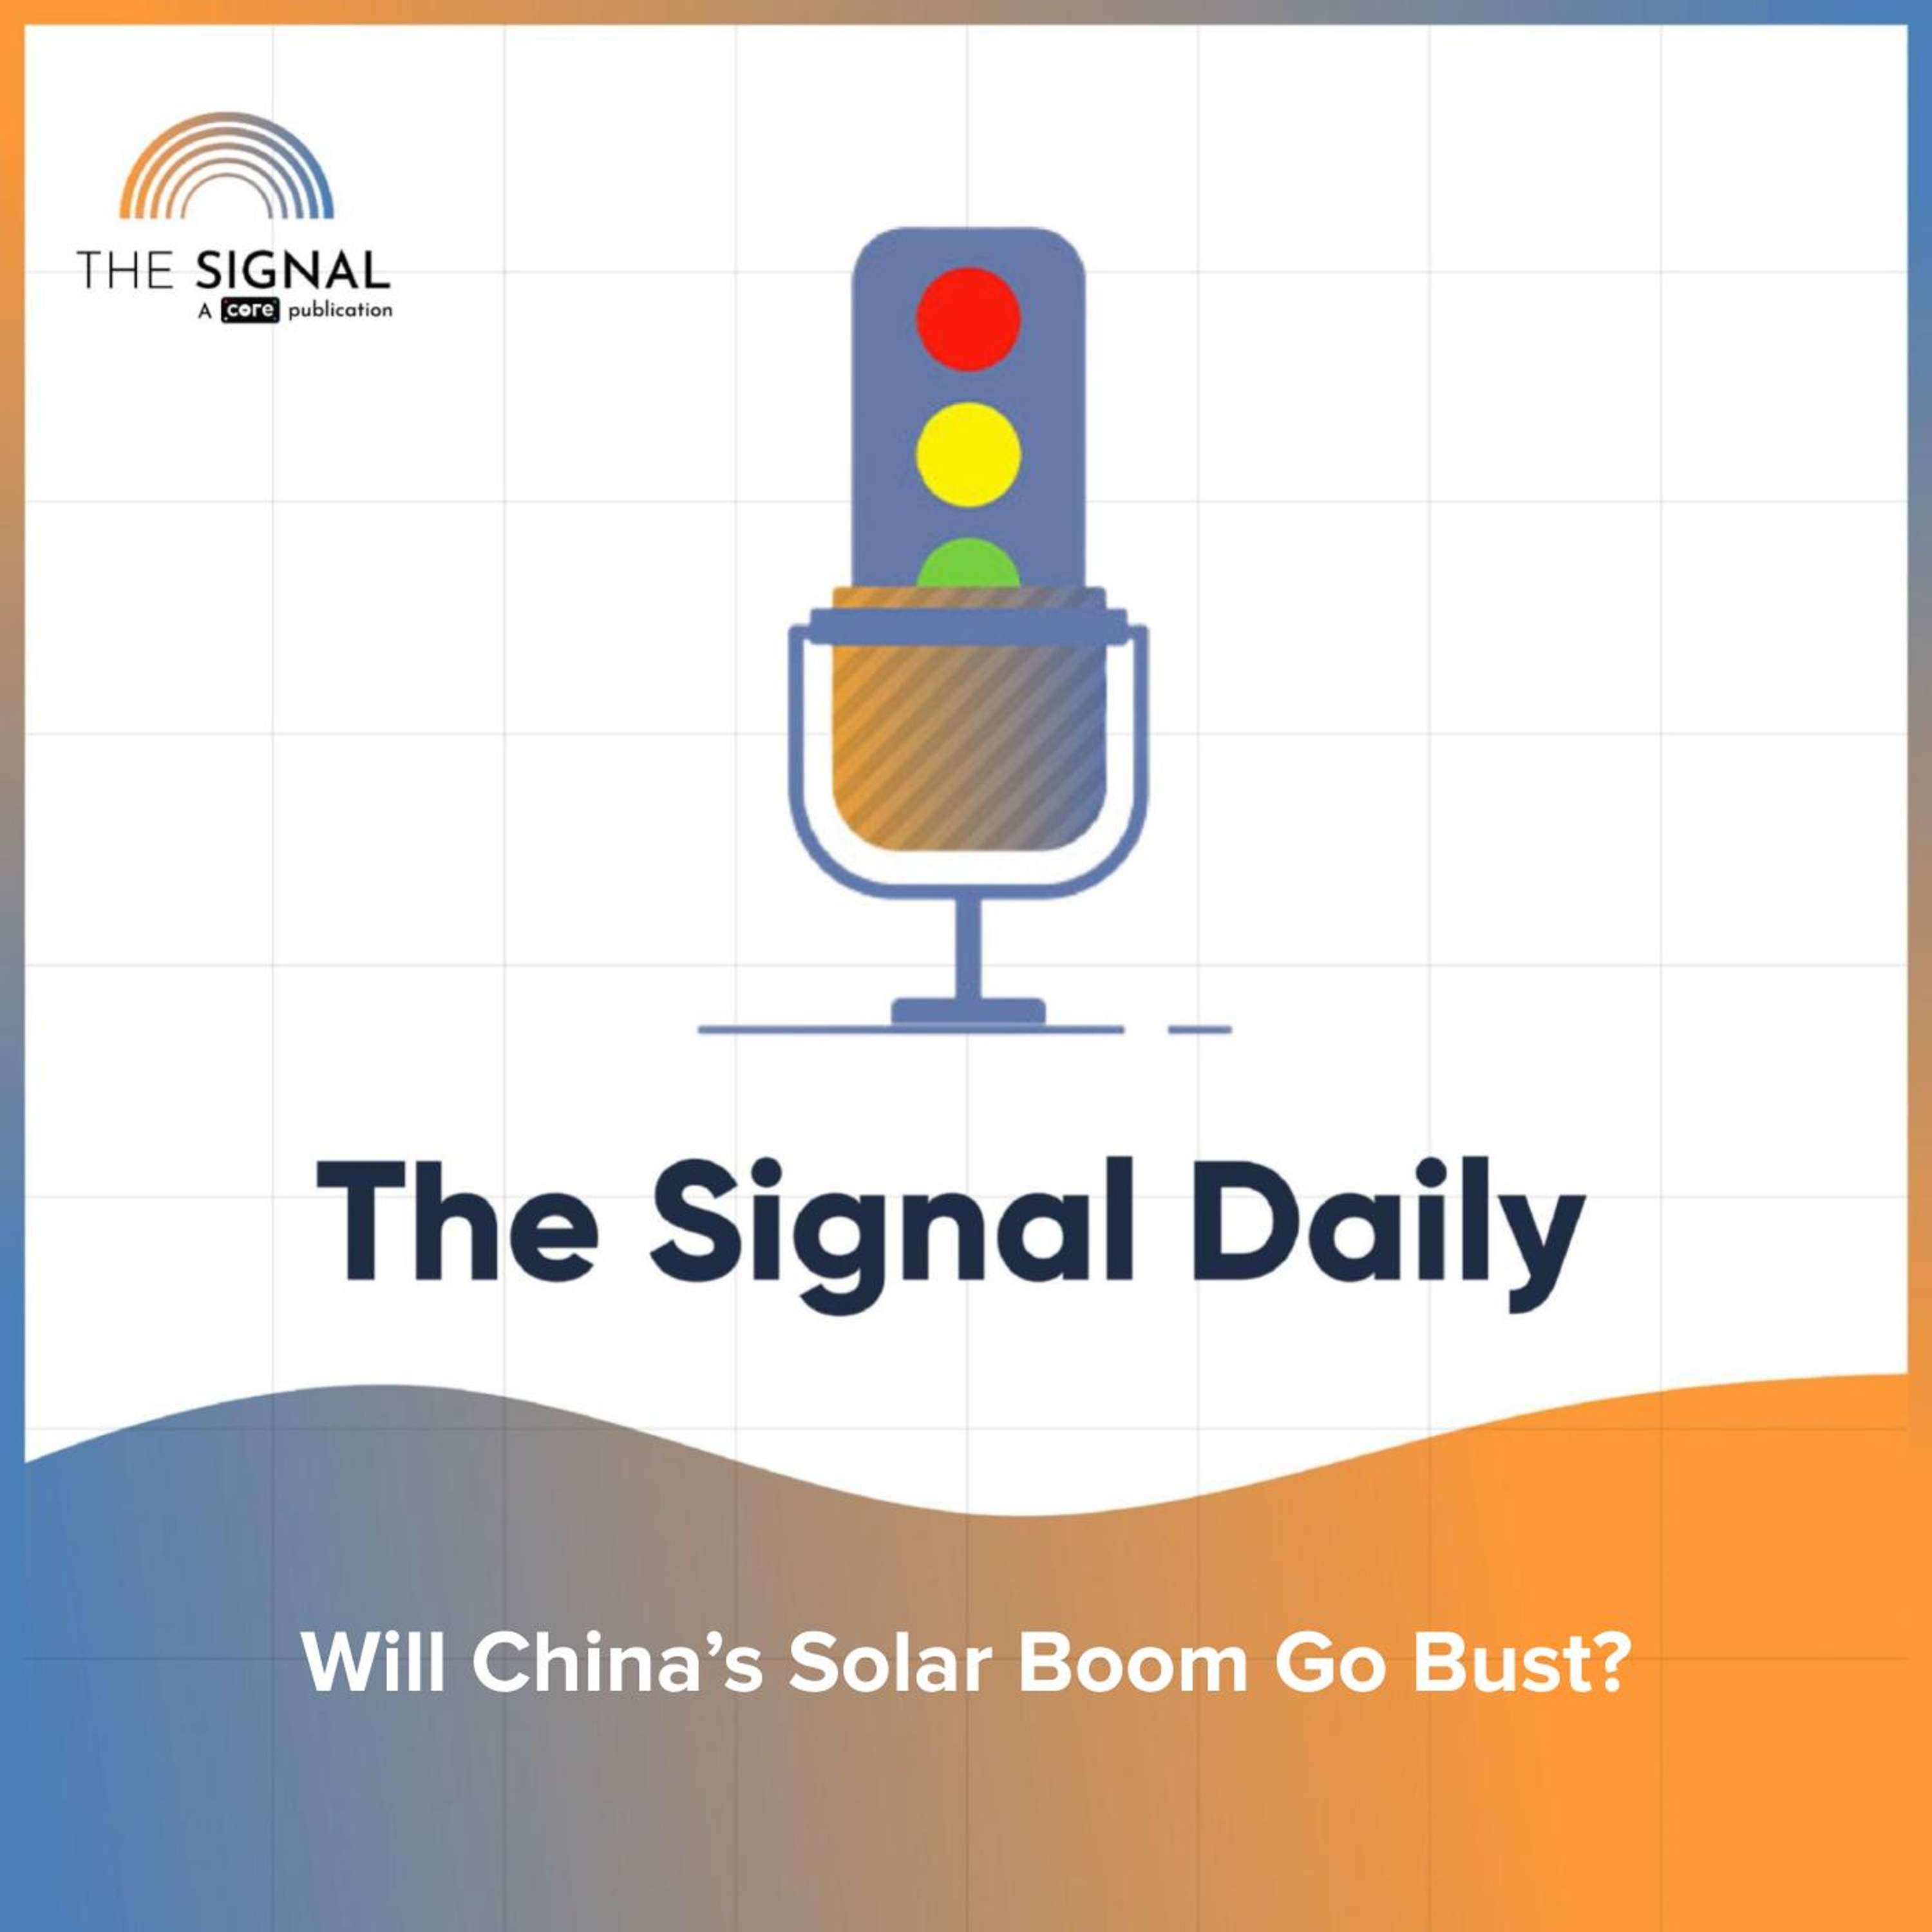 Will China’s Solar Boom Go Bust?